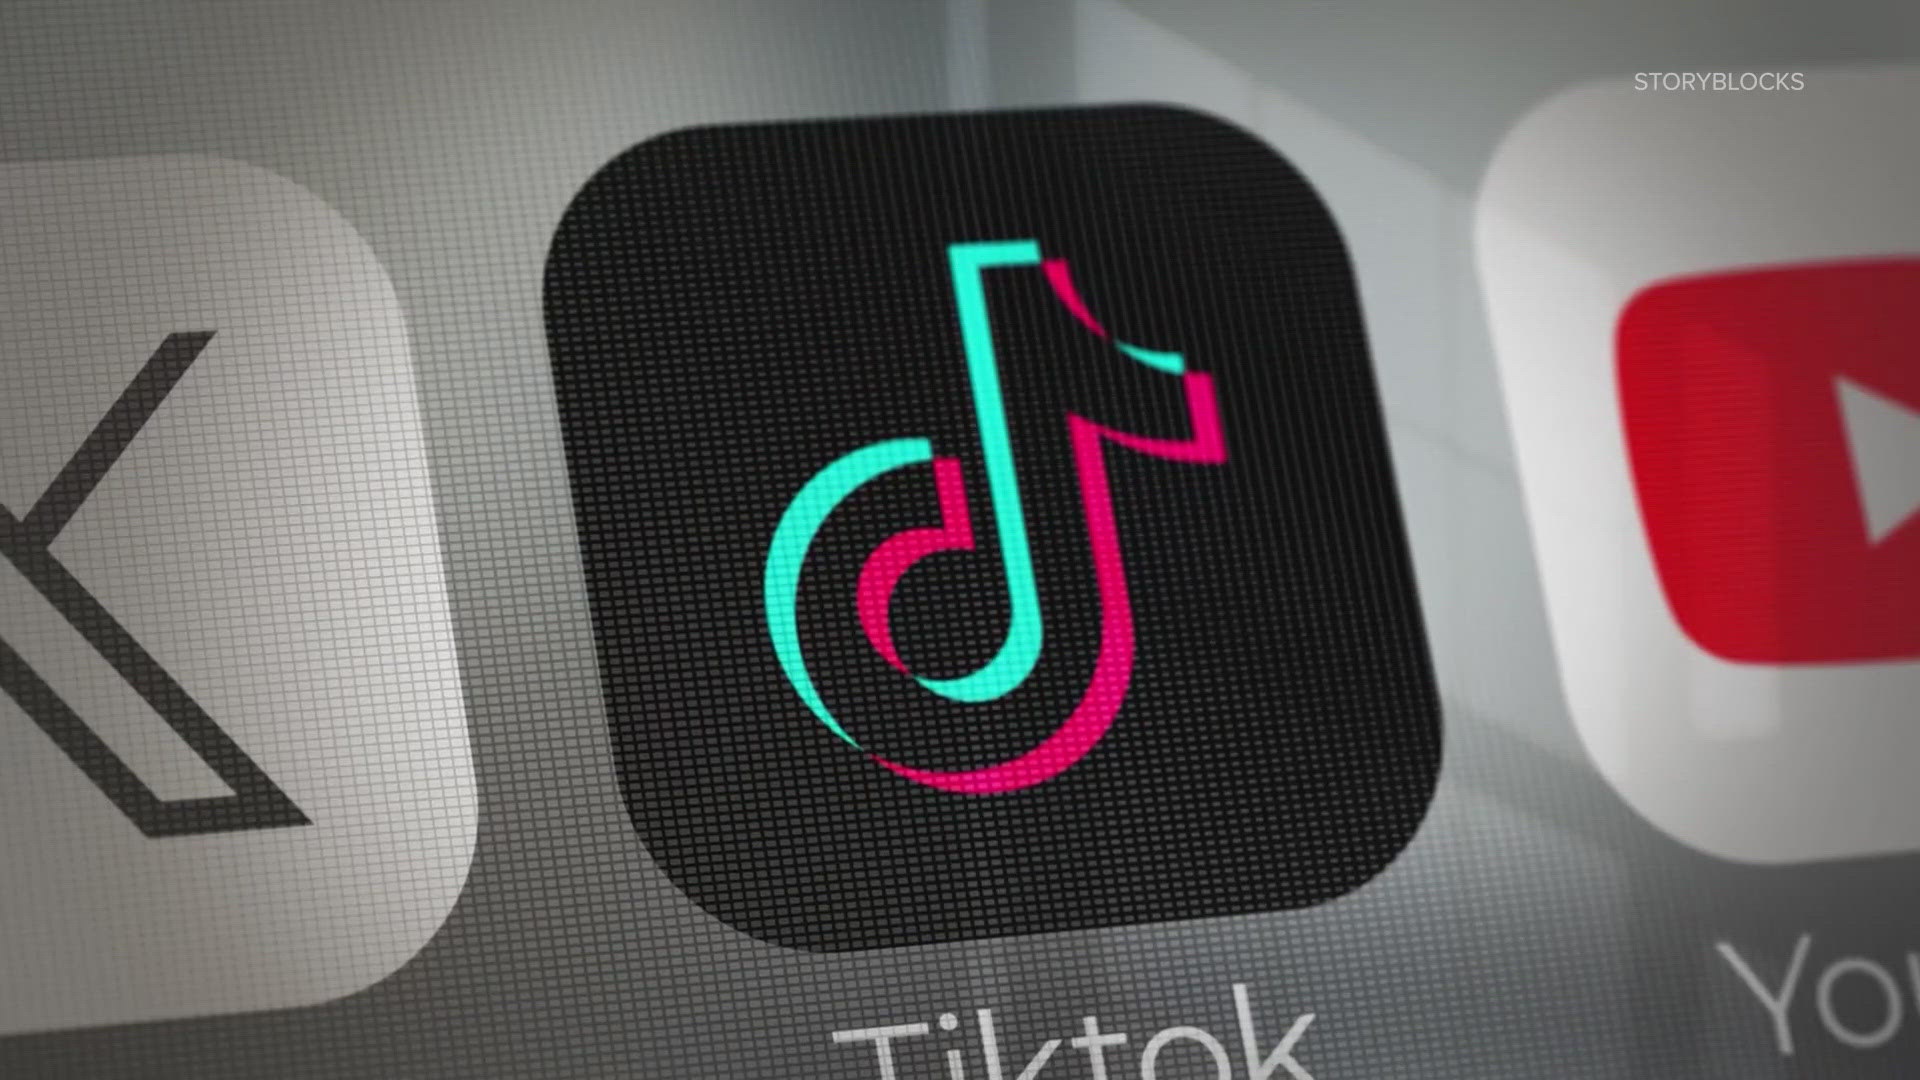 TikTok has been under fire for years for its relationship with China.